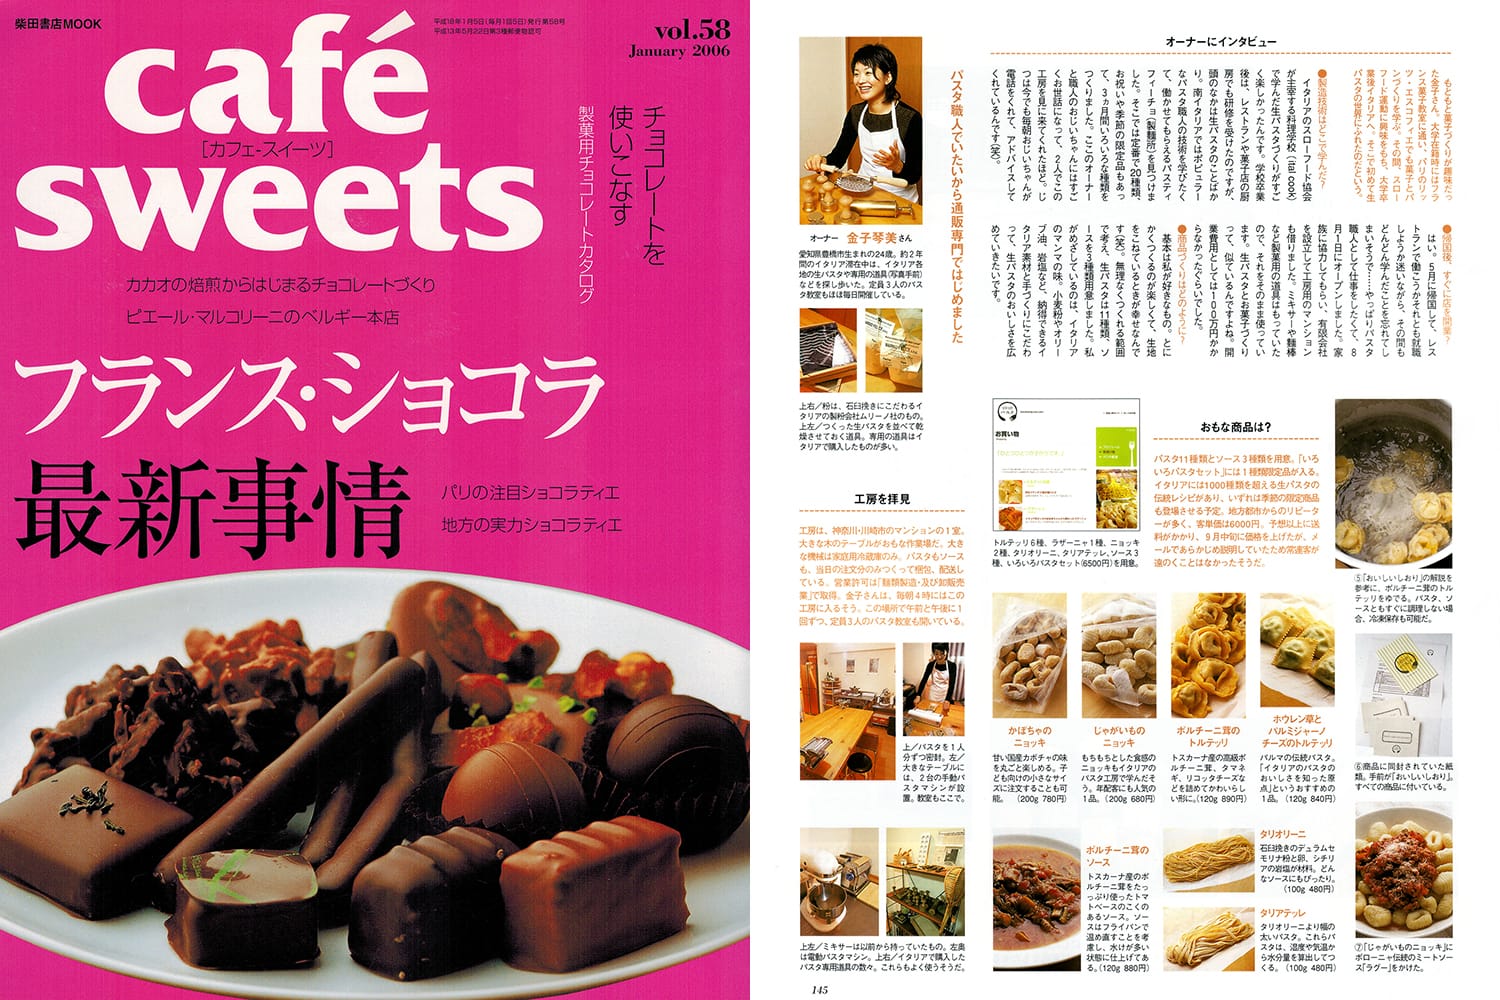 cafe-sweets (カフェ-スイーツ) vol.58 January 2006